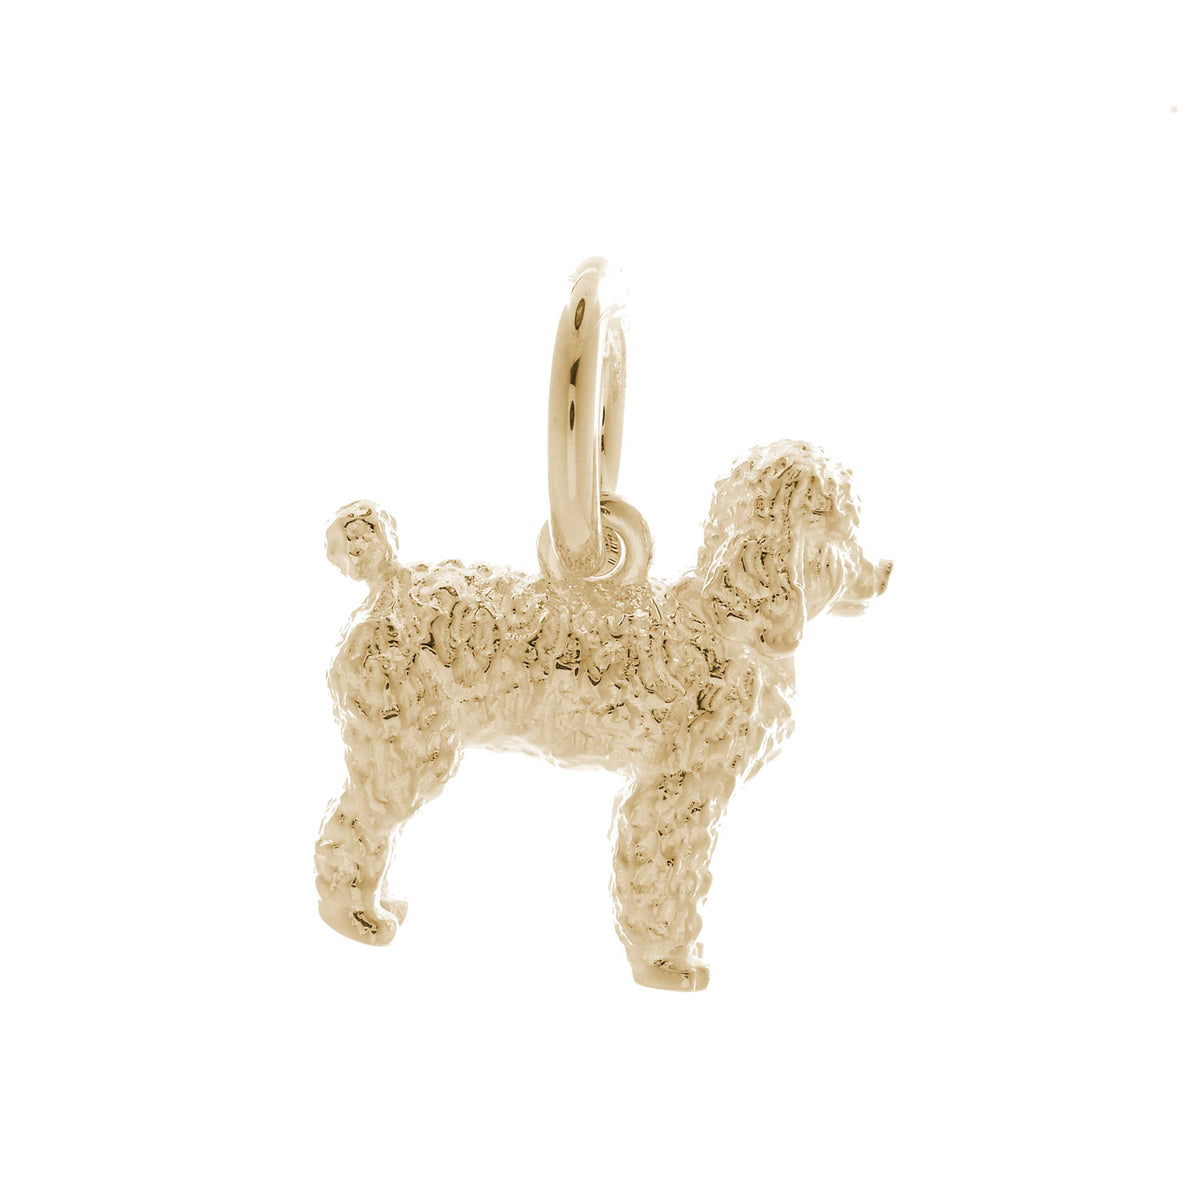 Solid 9ct gold Poodle charm with tiny bandana (optional), perfect for a charm bracelet or necklace.